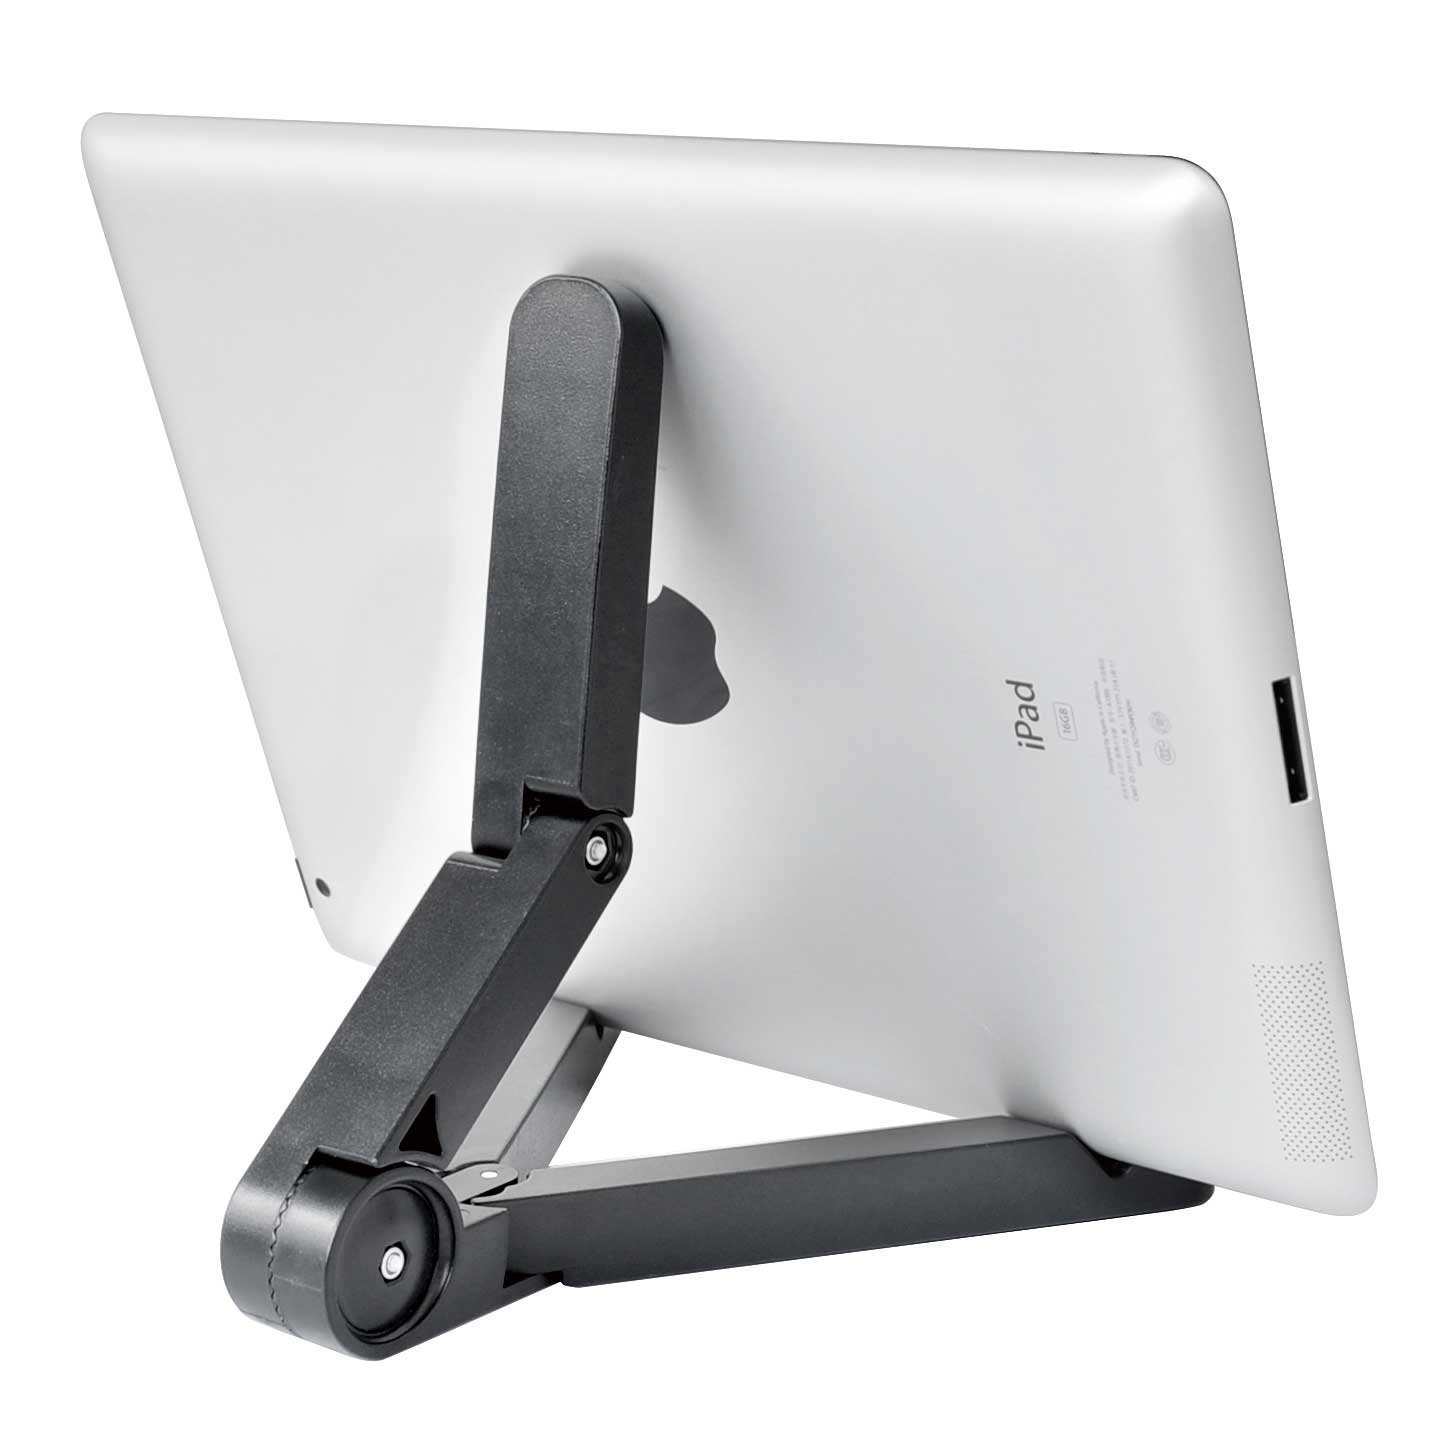 ipad-stand-by-bellstone-review-7